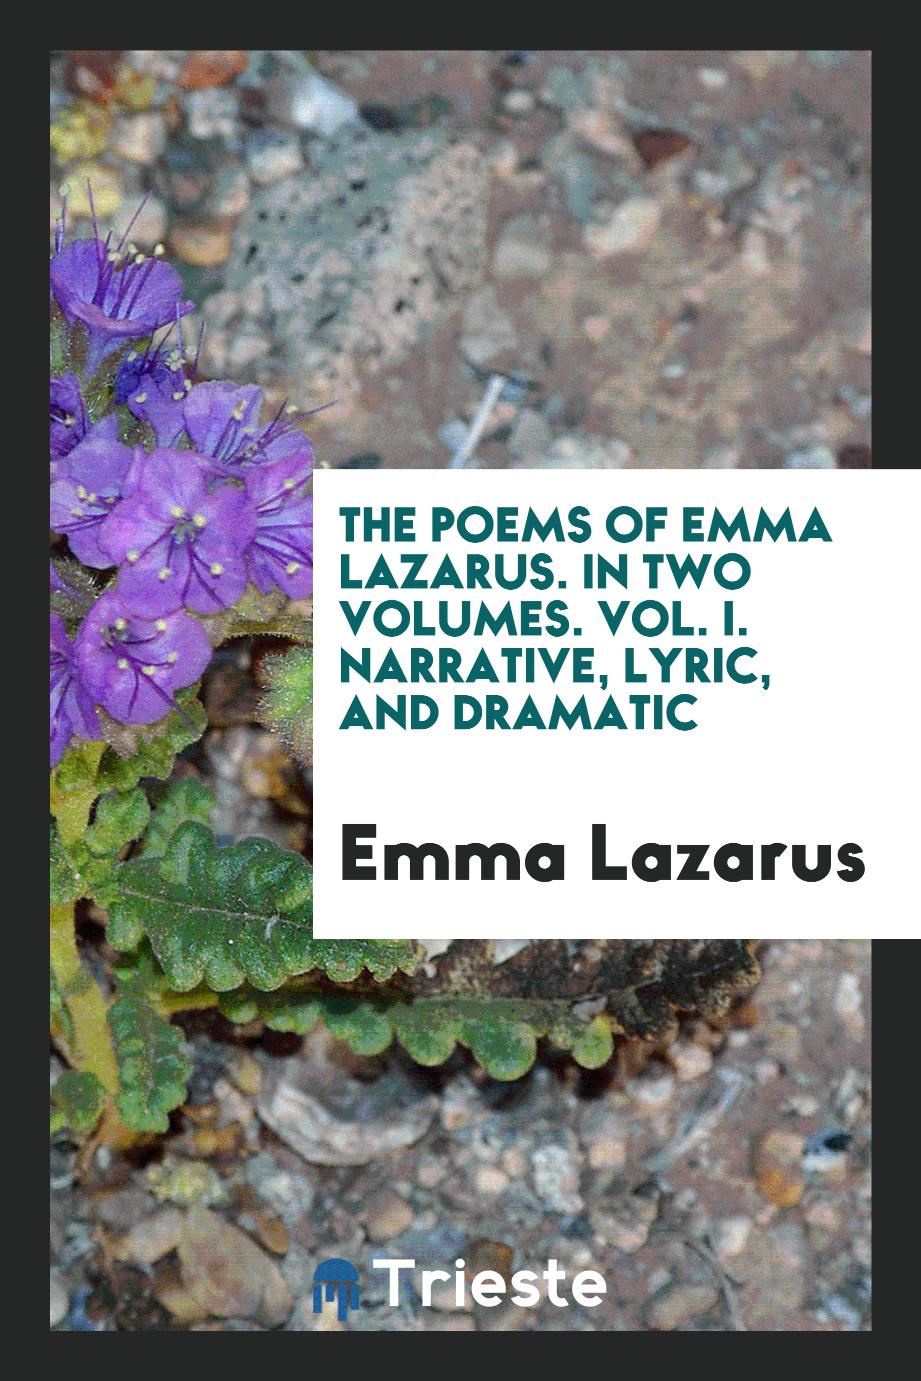 Emma Lazarus - The Poems of Emma Lazarus. In Two Volumes. Vol. I. Narrative, Lyric, and Dramatic